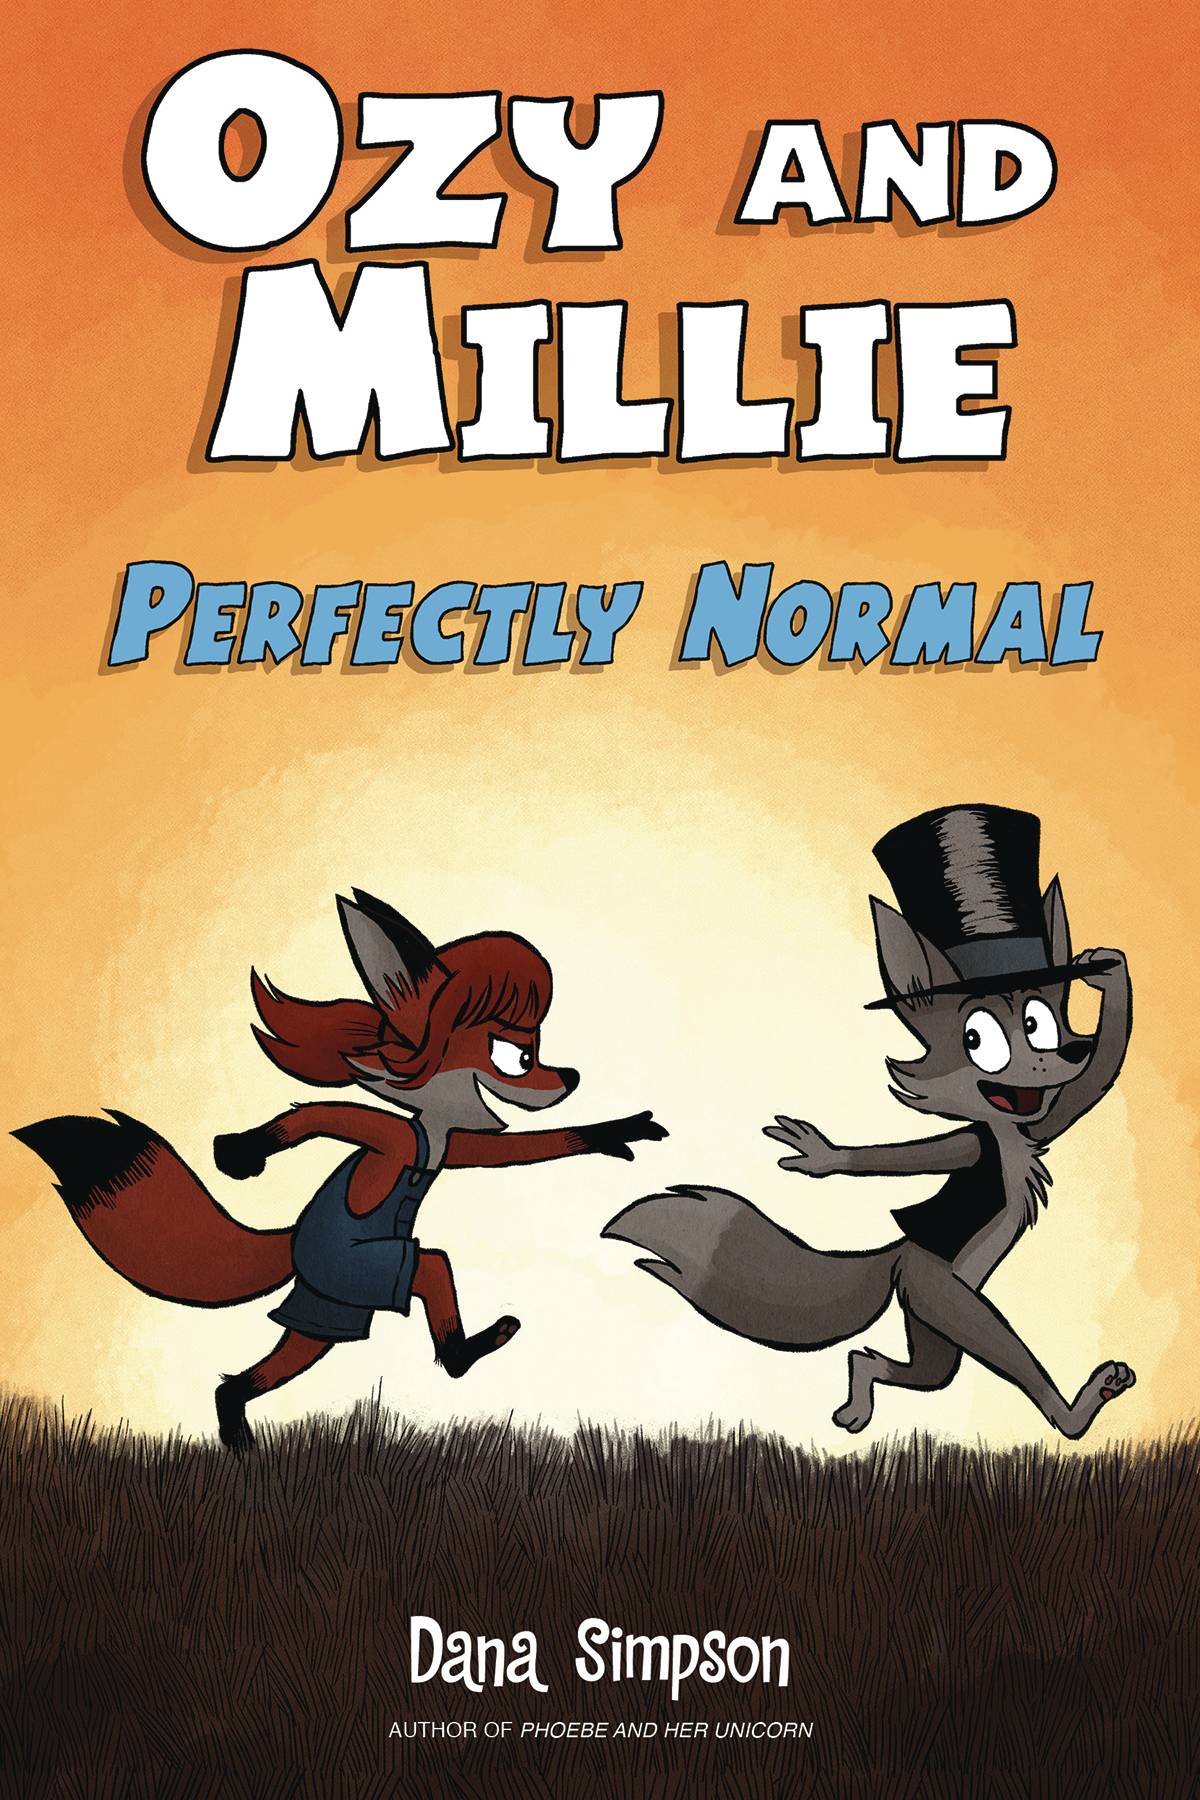 OZY AND MILLIE YR GN 02 PERFECTLY NORMAL